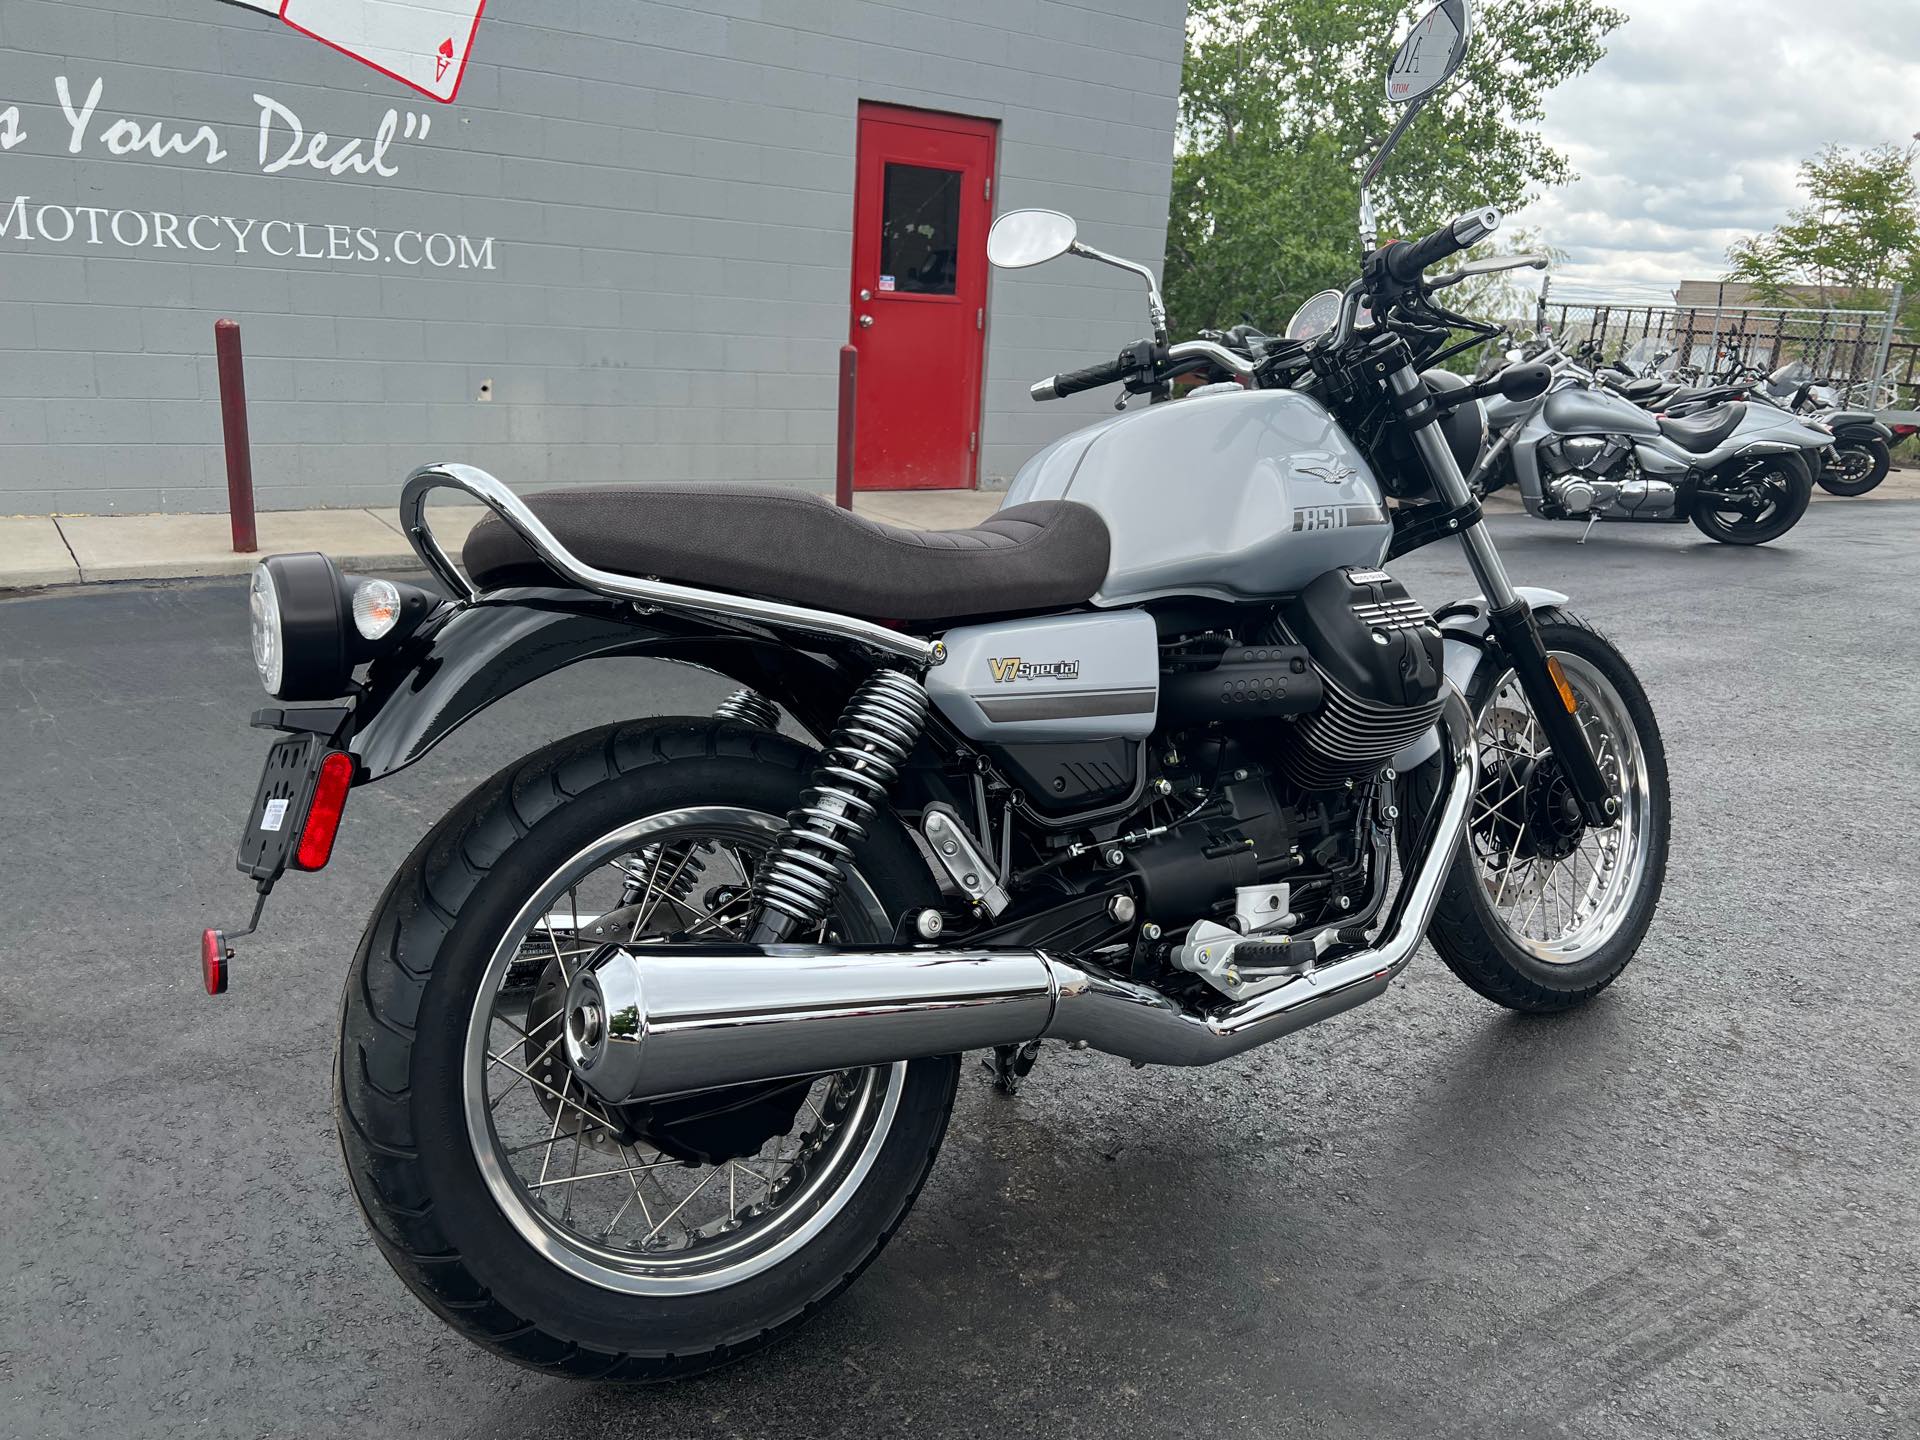 2022 Moto Guzzi V7 Special E5 at Aces Motorcycles - Fort Collins